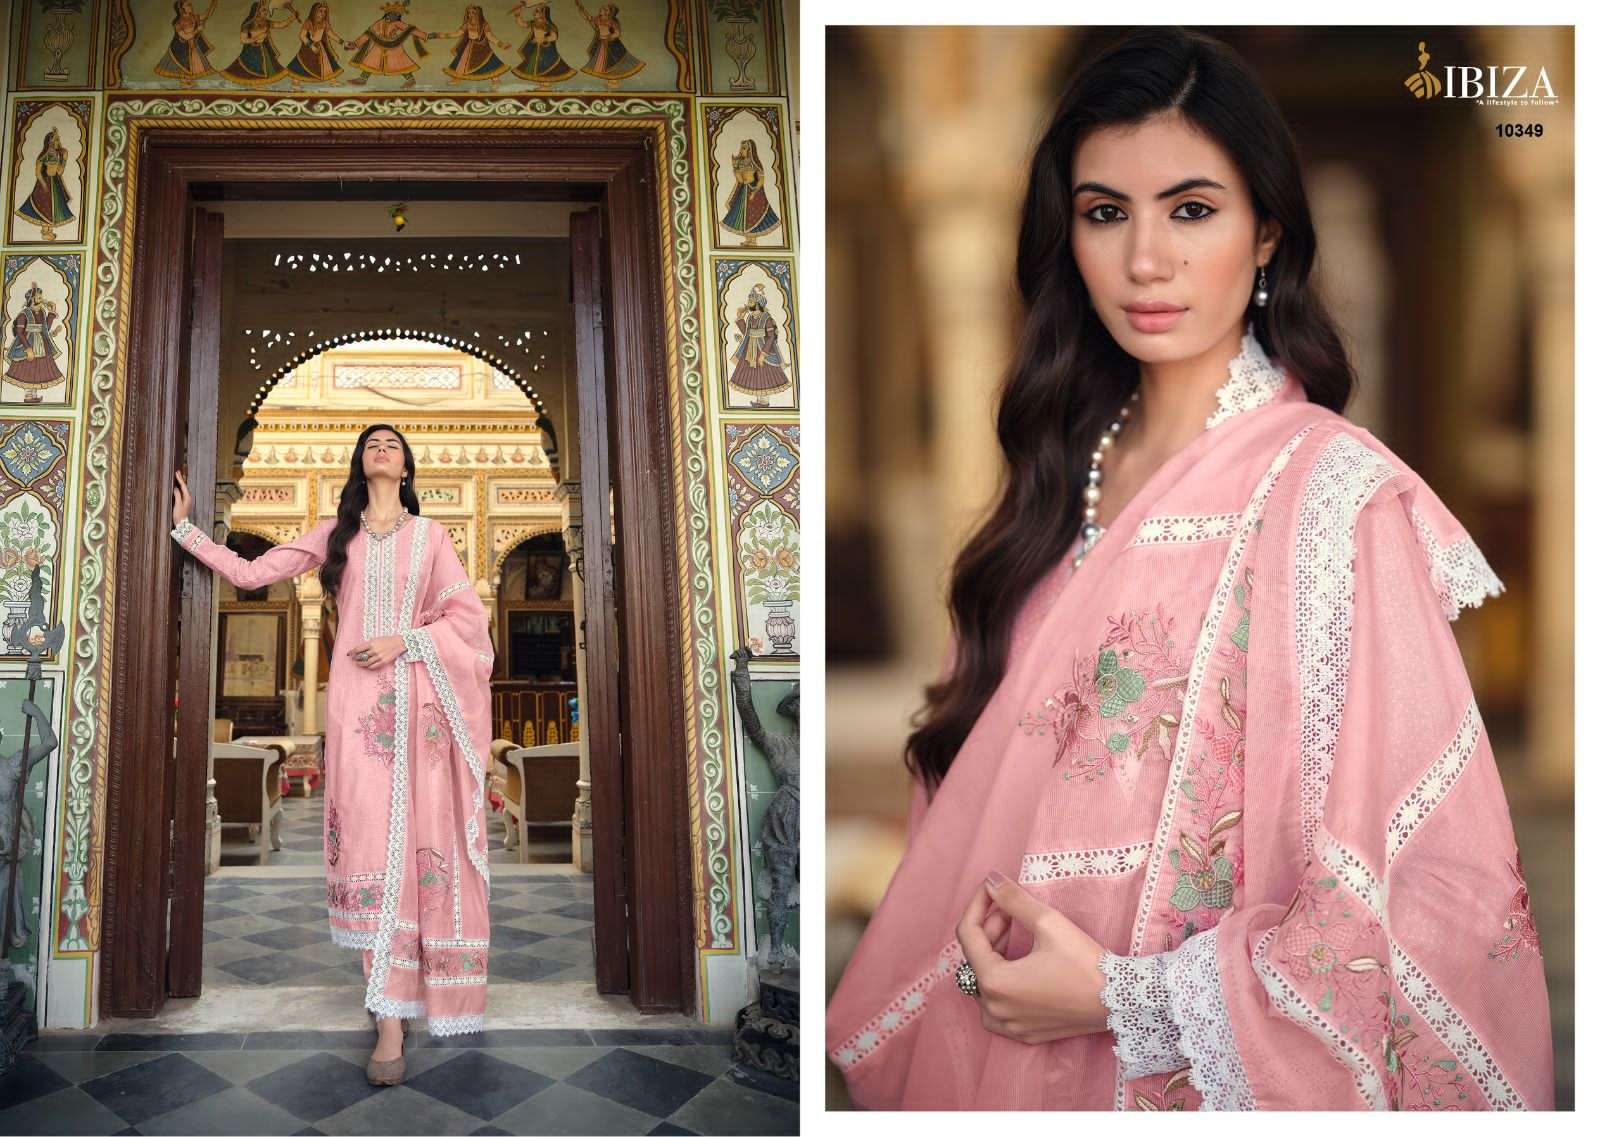 Raysa By Ibiza 10347 To 10354 Series Beautiful Suits Colorful Stylish Fancy Casual Wear & Ethnic Wear Pure Linen Cotton Dresses At Wholesale Price